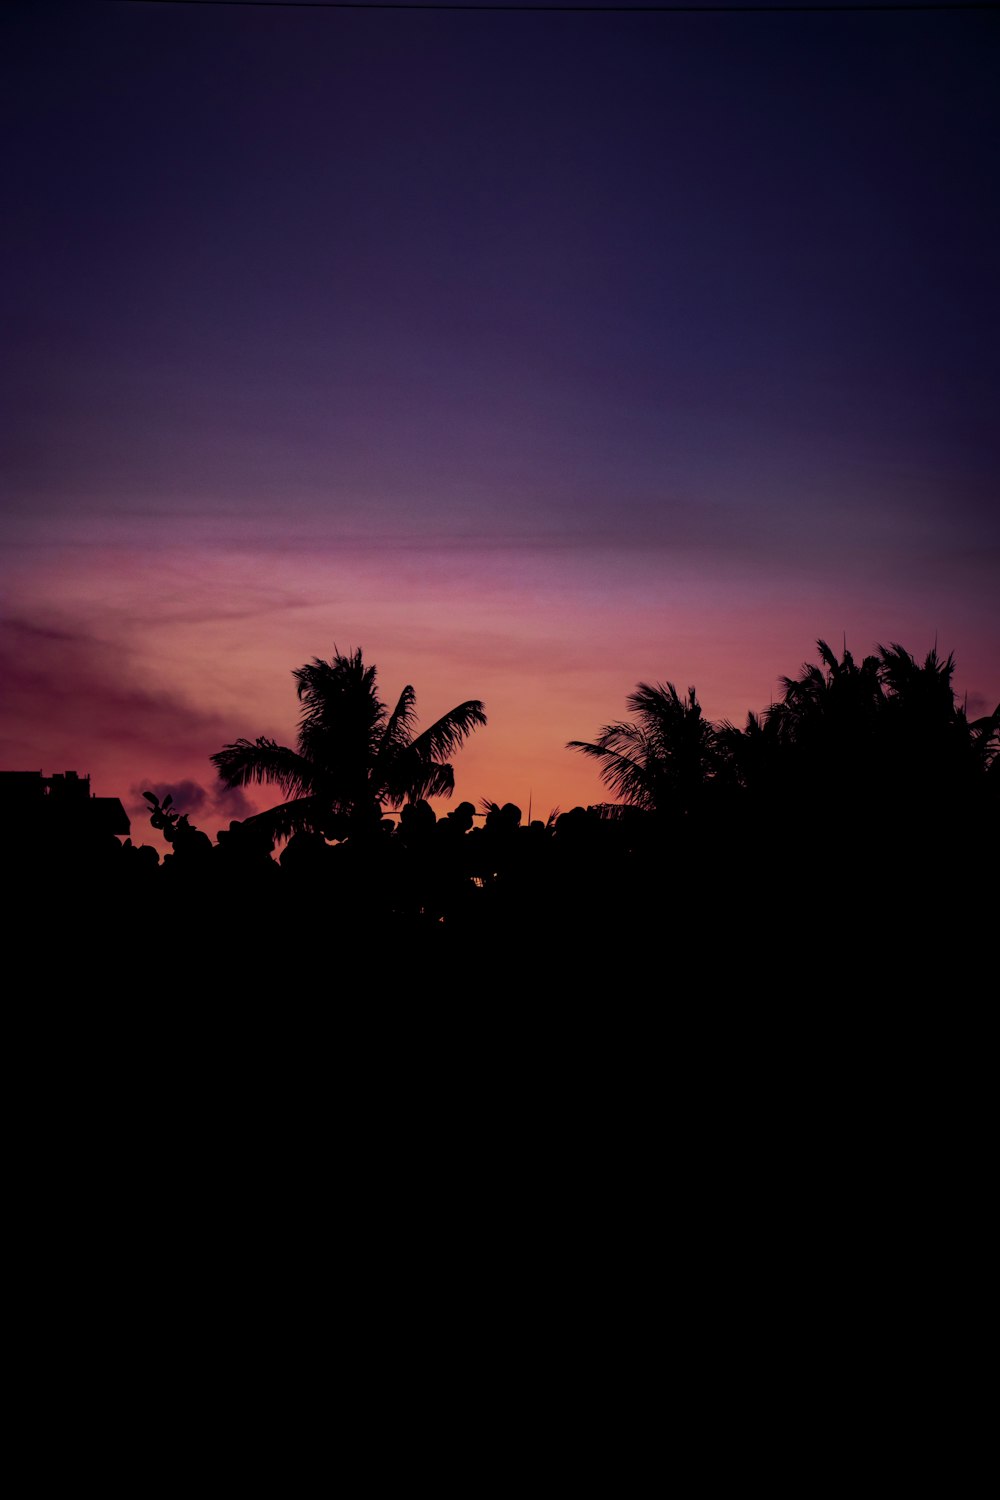 a view of a sunset with palm trees in the foreground